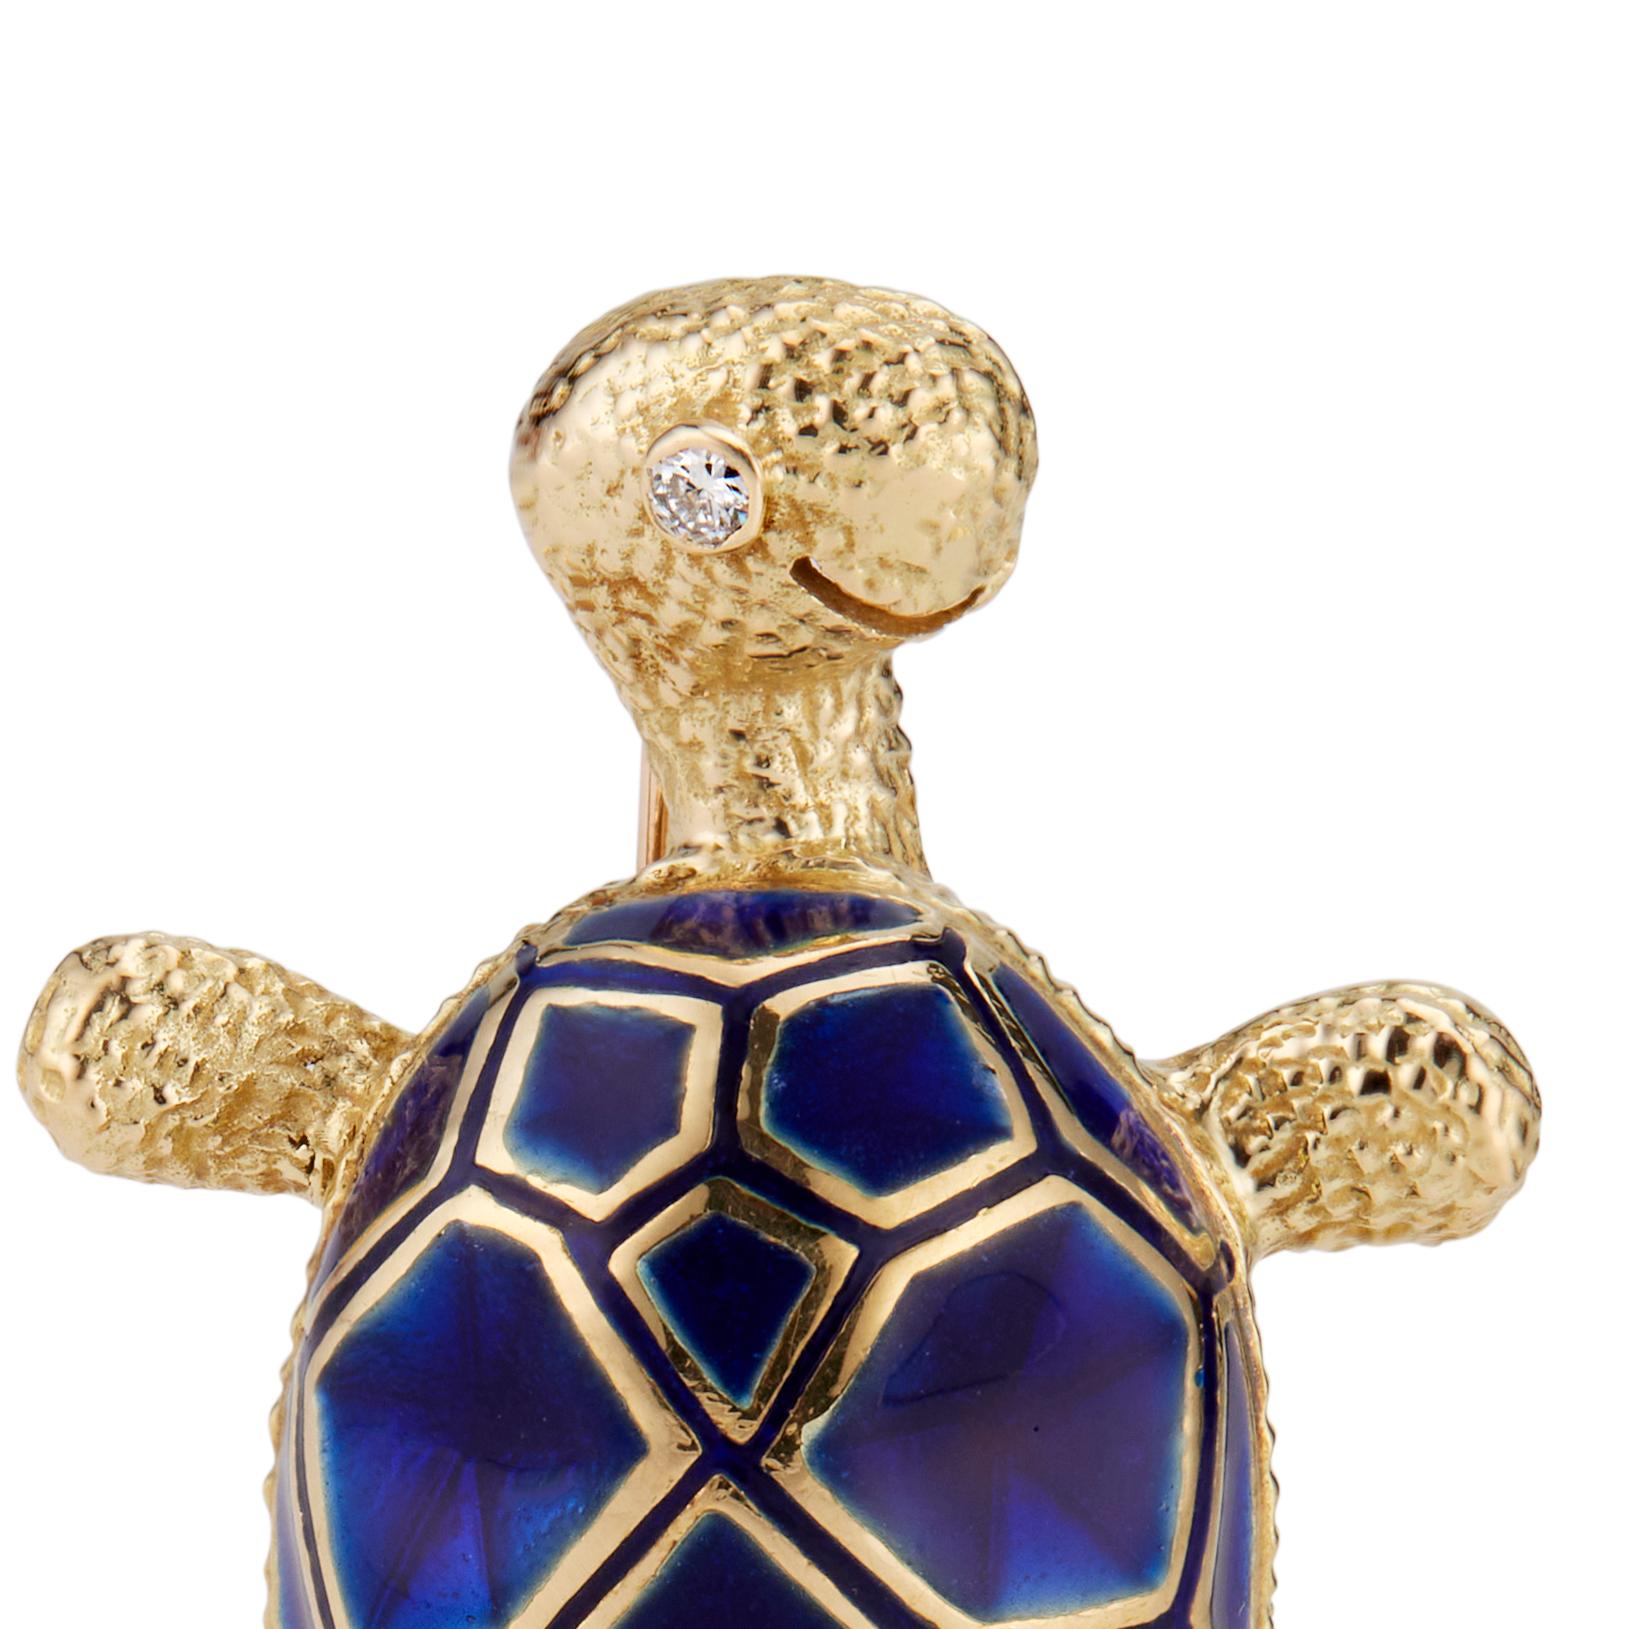 Blue enamel Turtle brooch in 18k yellow gold with a bright full cut Diamond eye. 

1 round full cut Diamonds, approx. total weight .03cts, G, SI1
18k yellow gold
Tested and stamped: 18k
Hallmark: PL ©
9.6 grams
Top to bottom: 39.53mm or 1.56